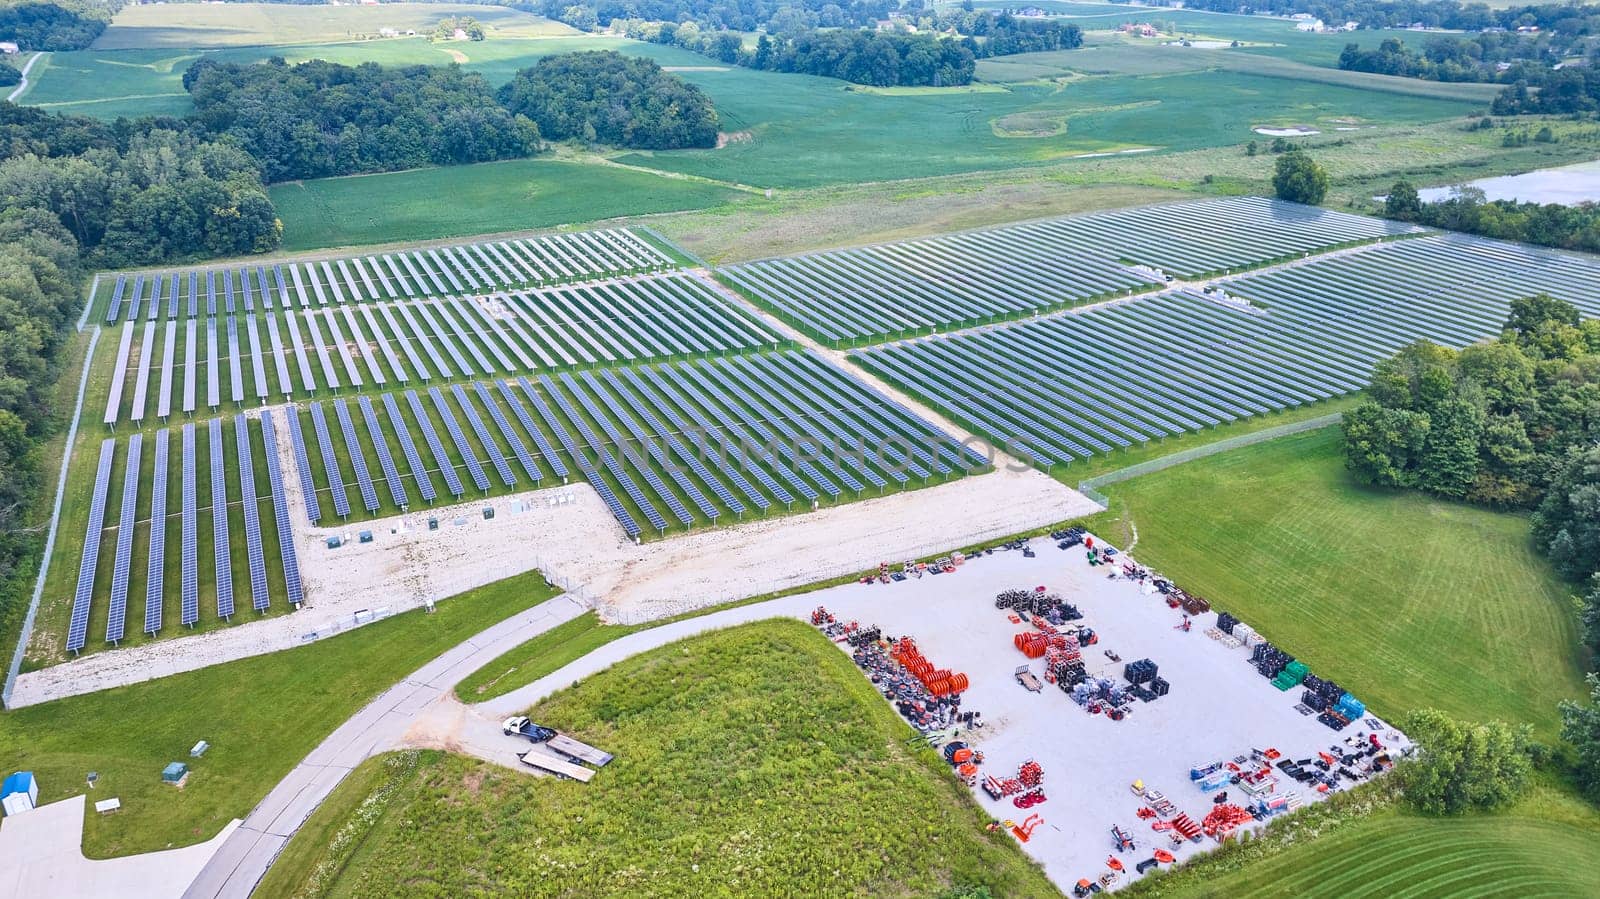 Image of Aerial of large solar farm with nearby lot full of construction equipment parts